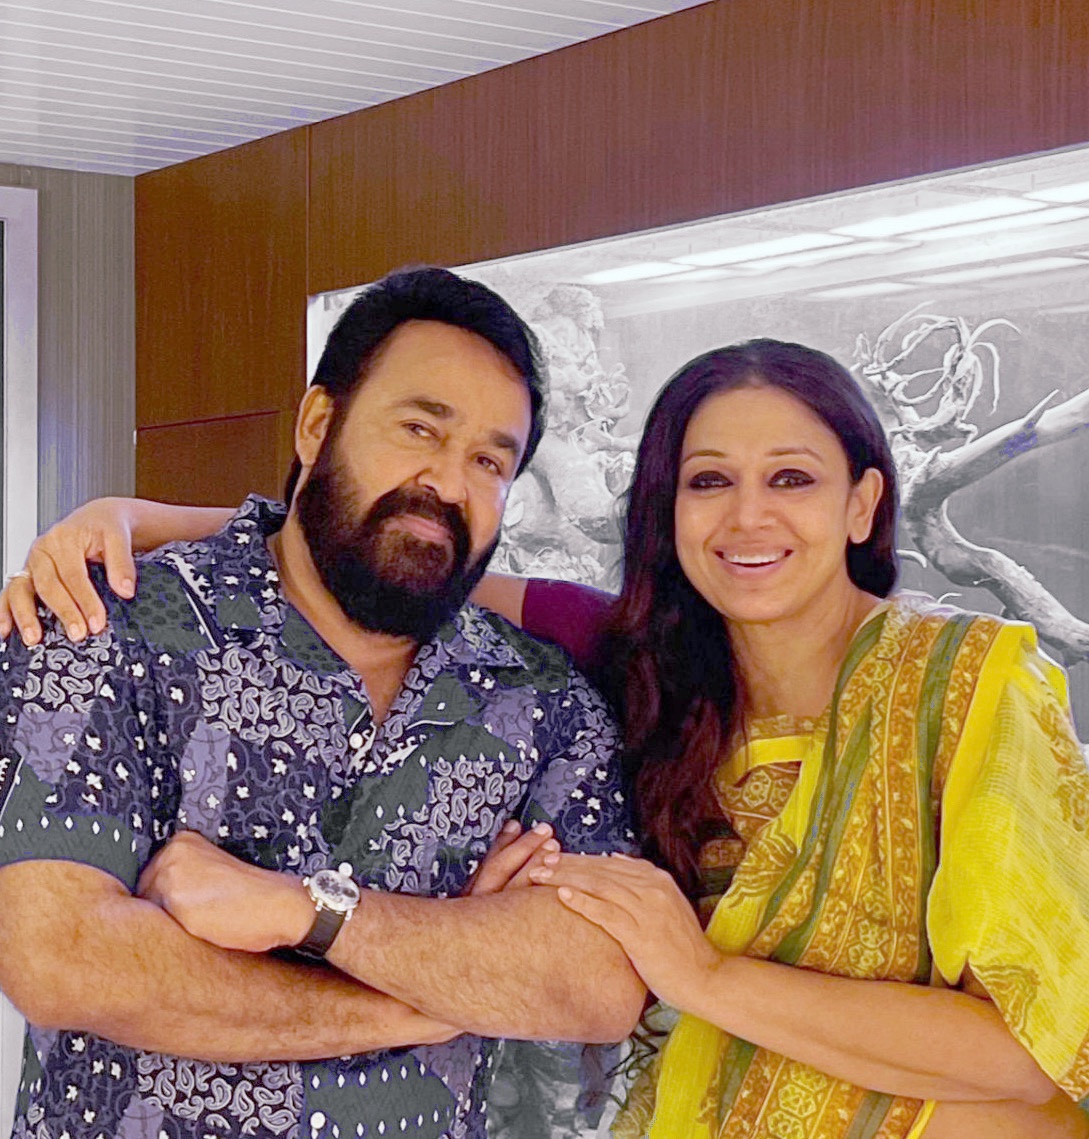 “Happy birthday to Lal. The one and only. Great to be shooting together again💫”

via shobana’s instagram • #happybirthdaymohanlal